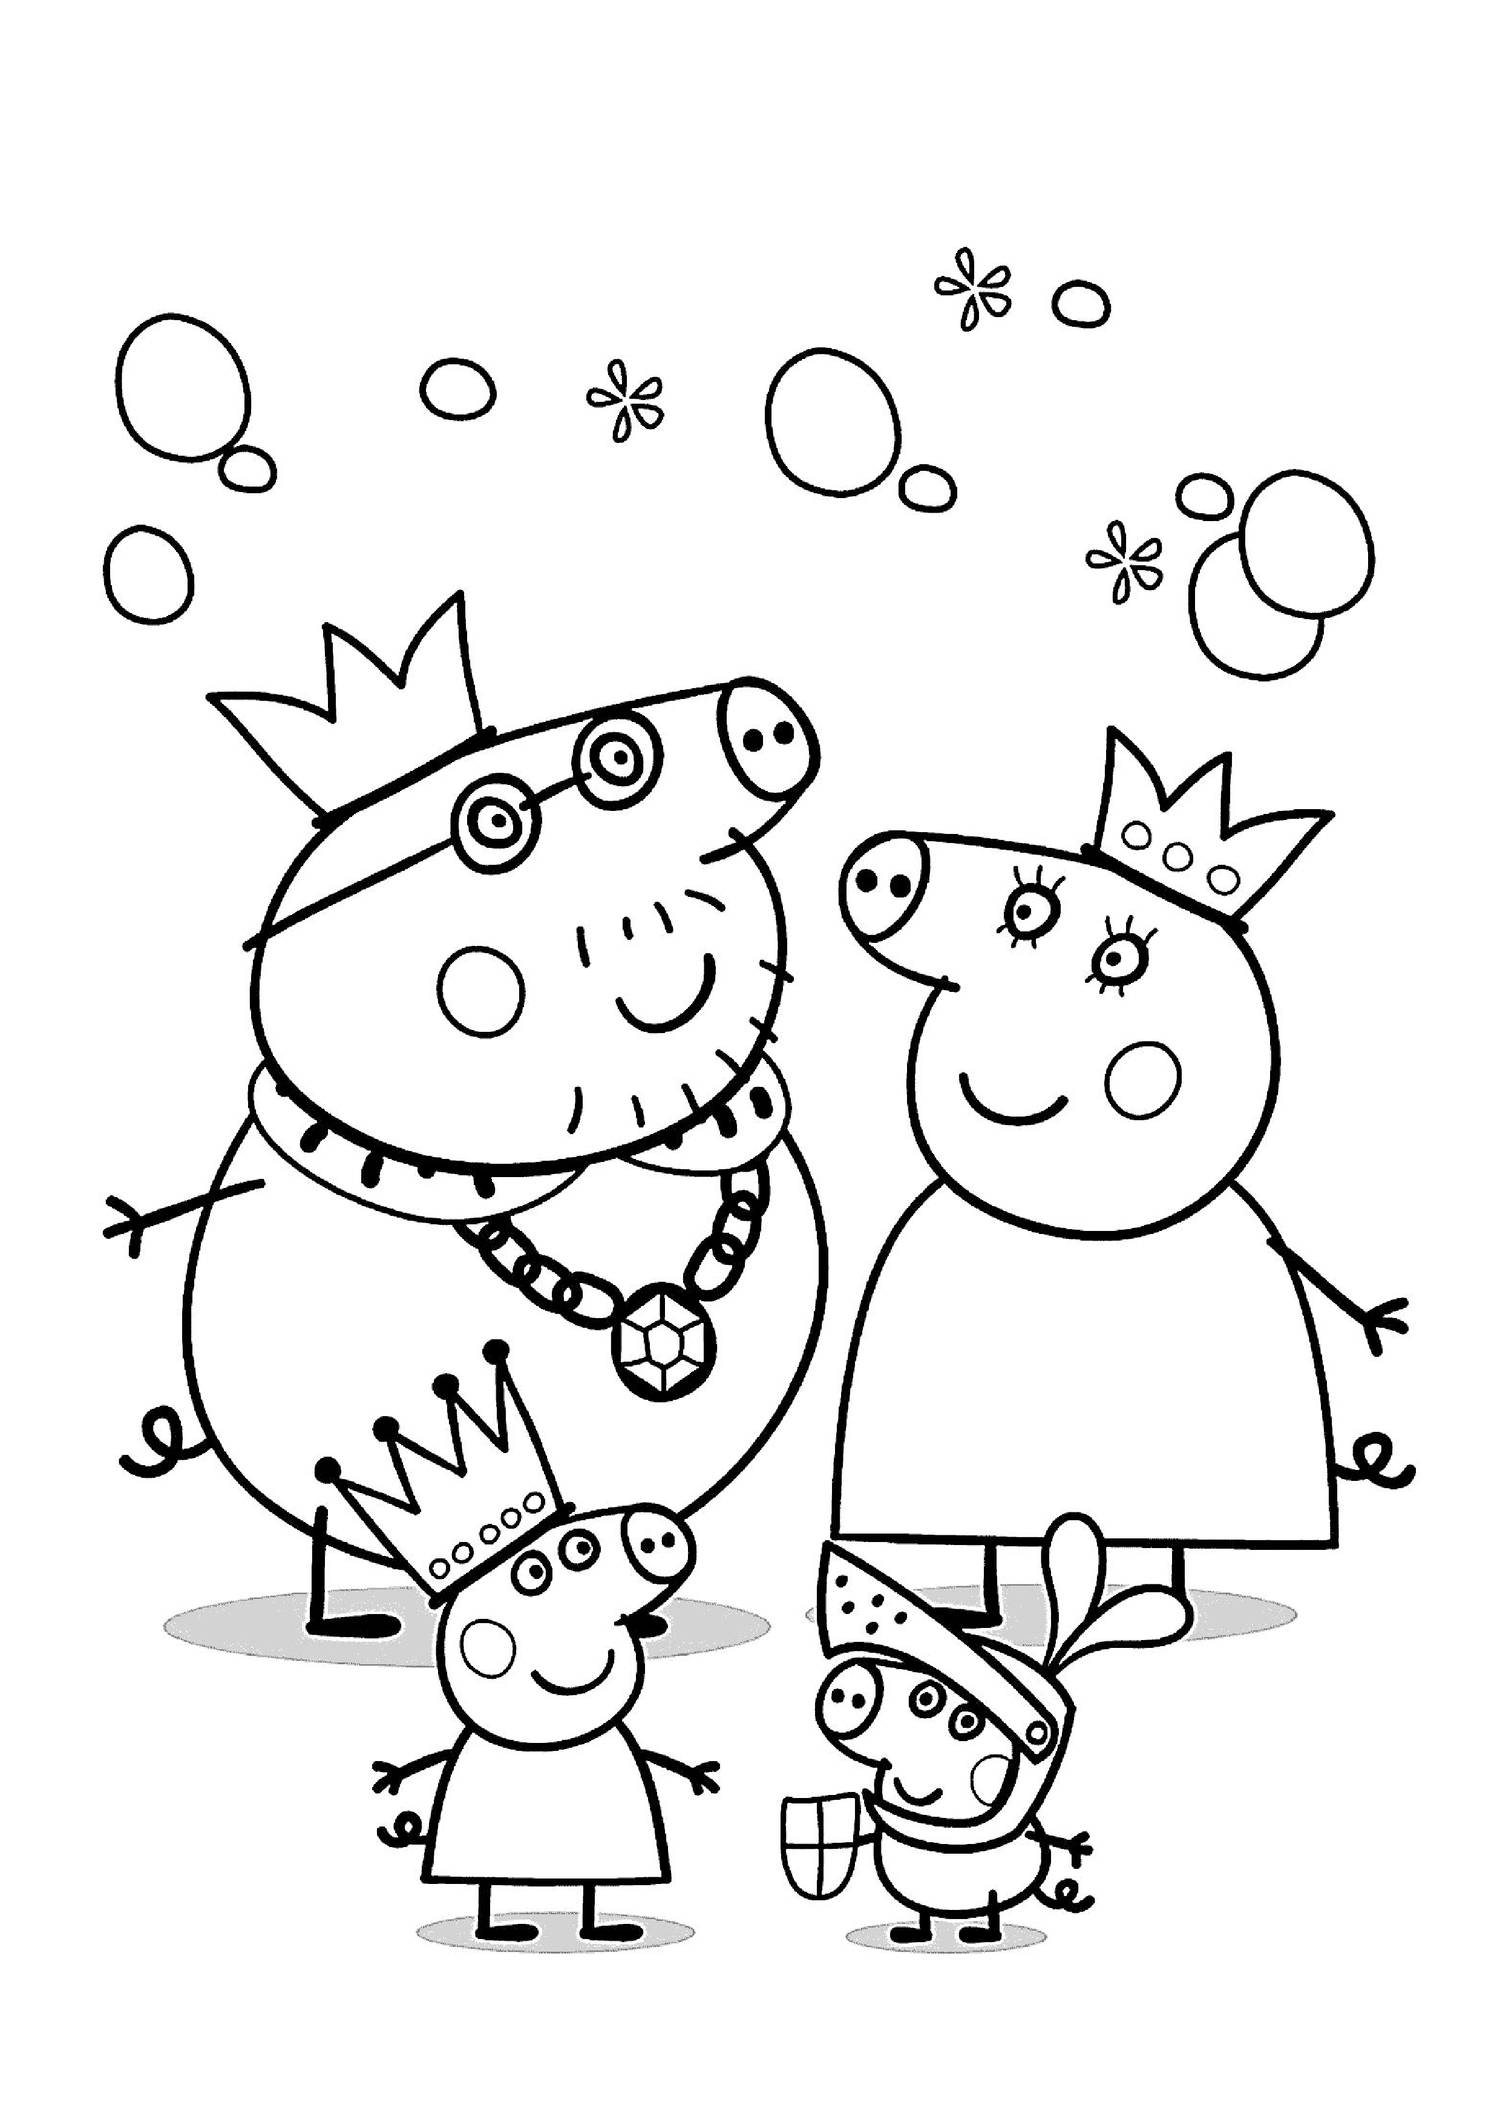 Pepa Pig Coloring Pages.pdf | DocDroid